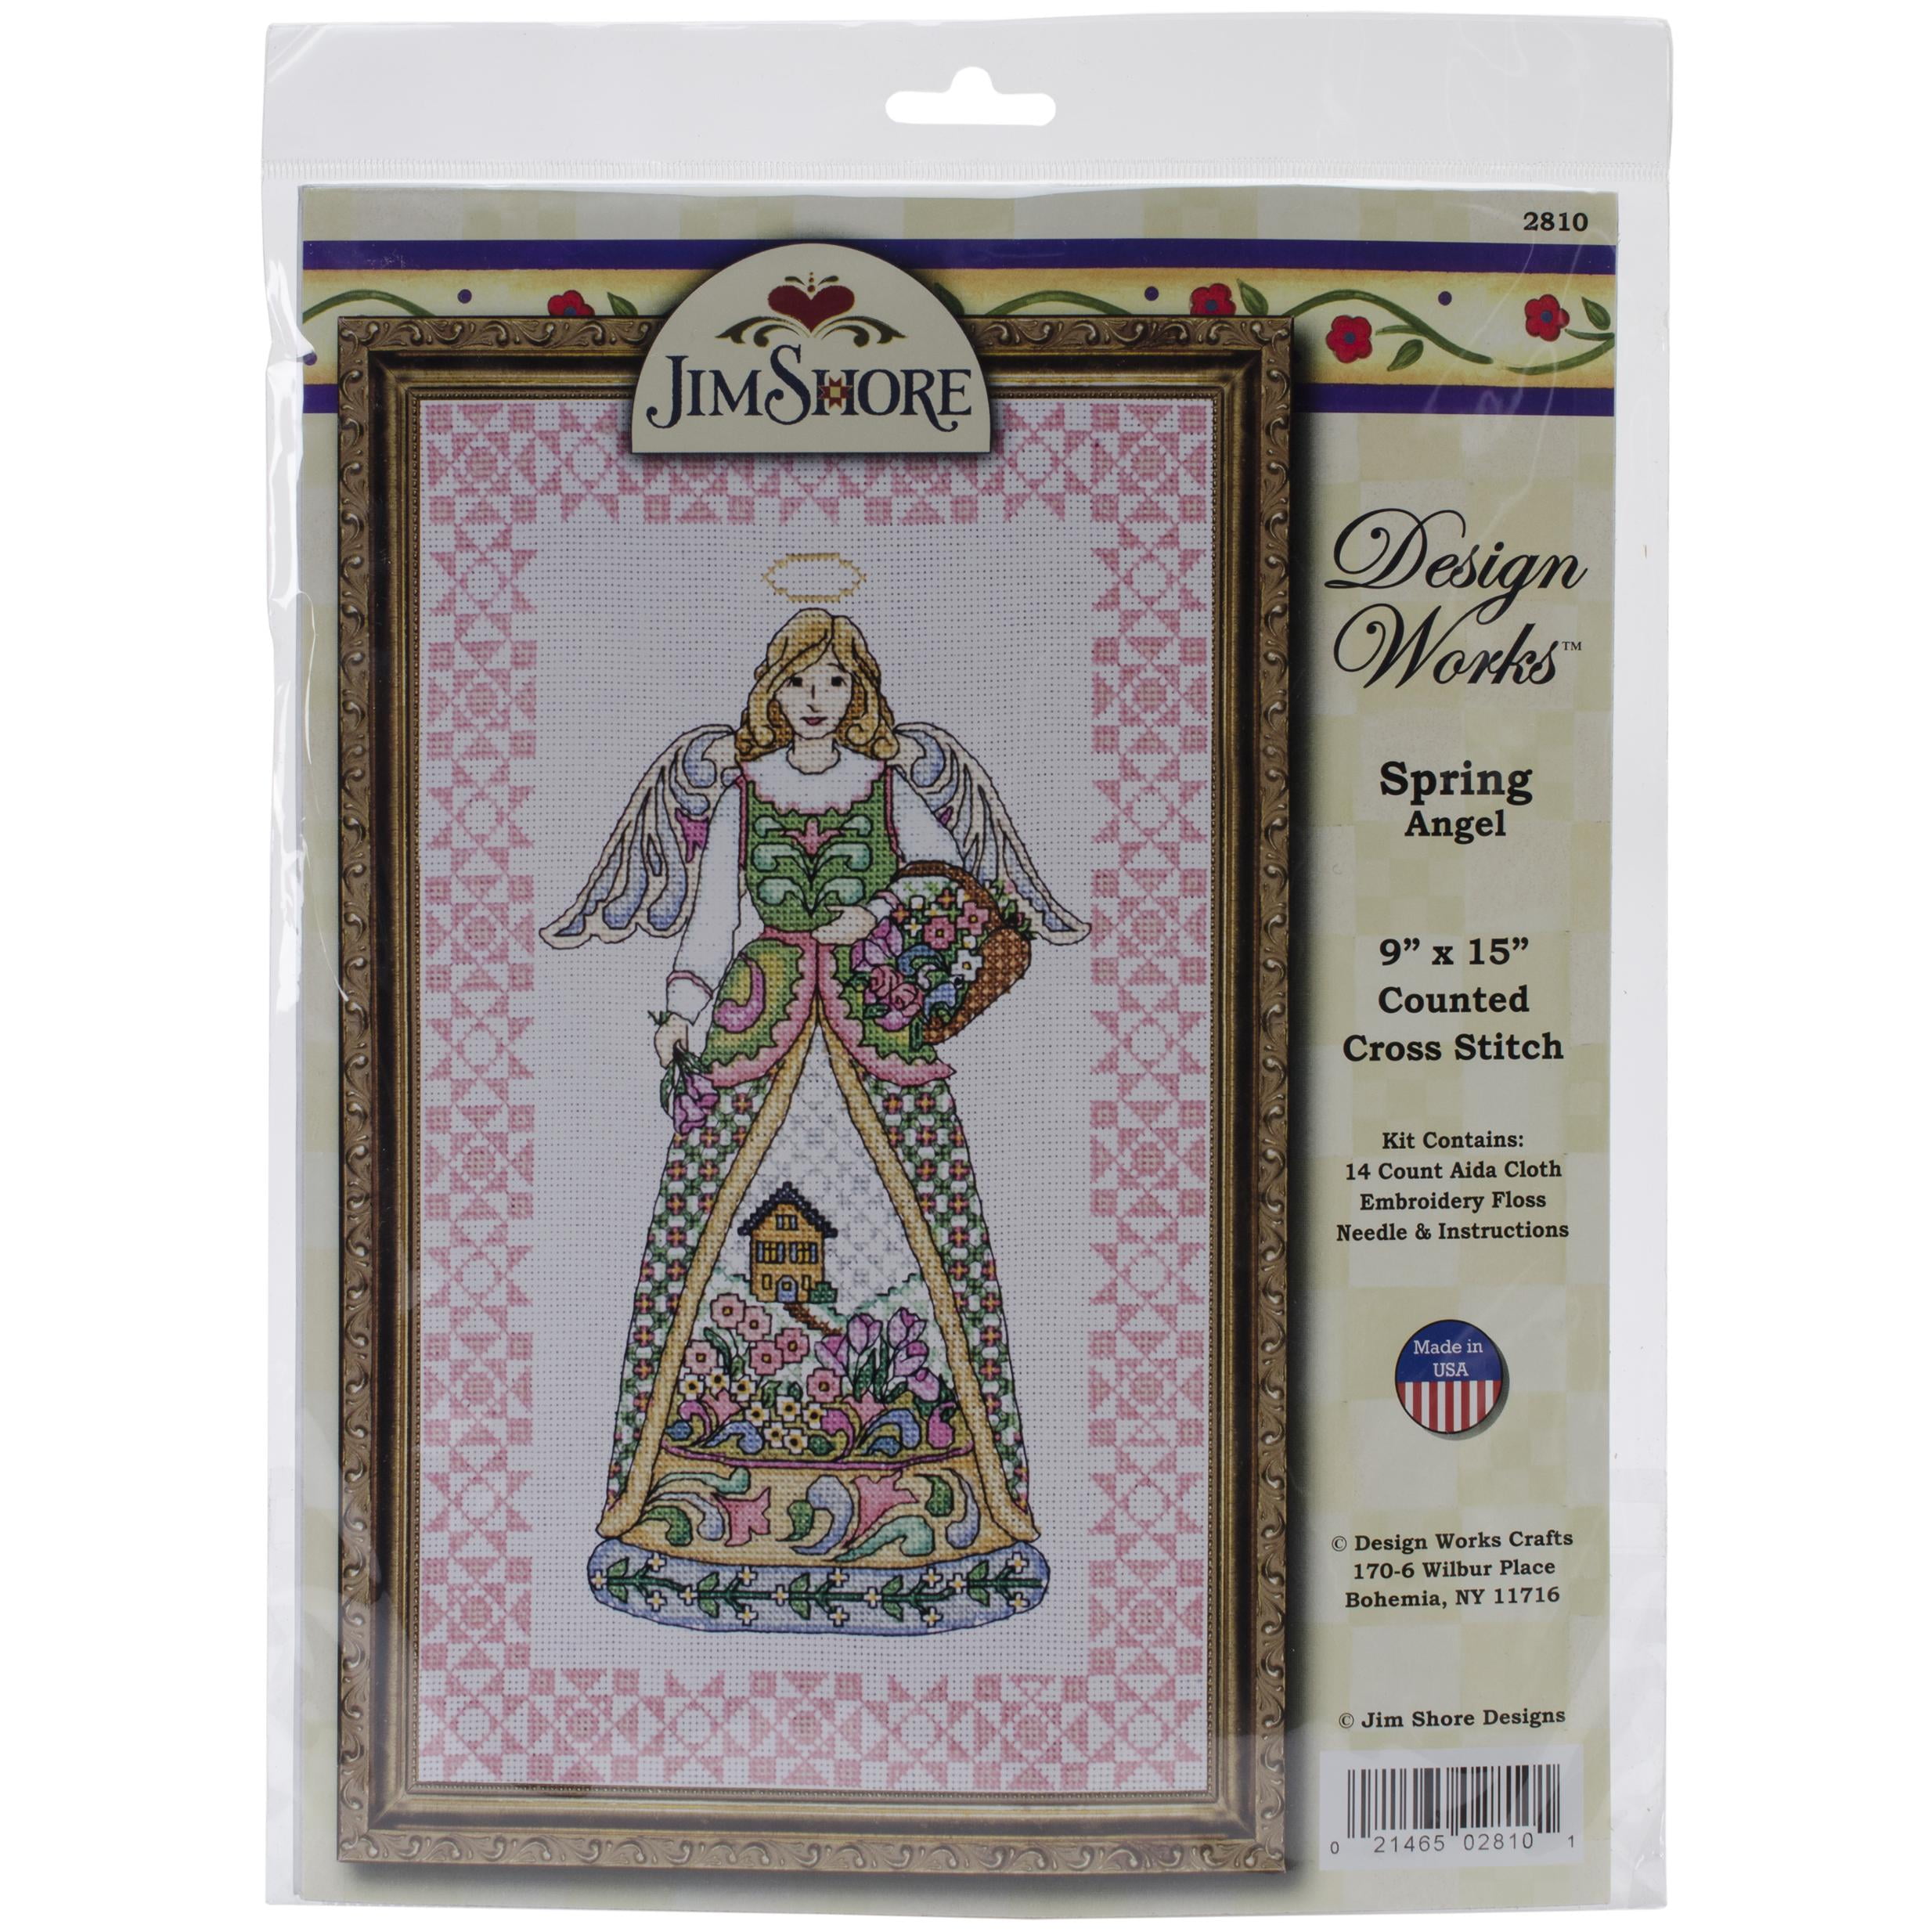 Tobin 12 Days-Jim Shore Counted Cross Stitch Kit-14 by 16-Inch 14 Count